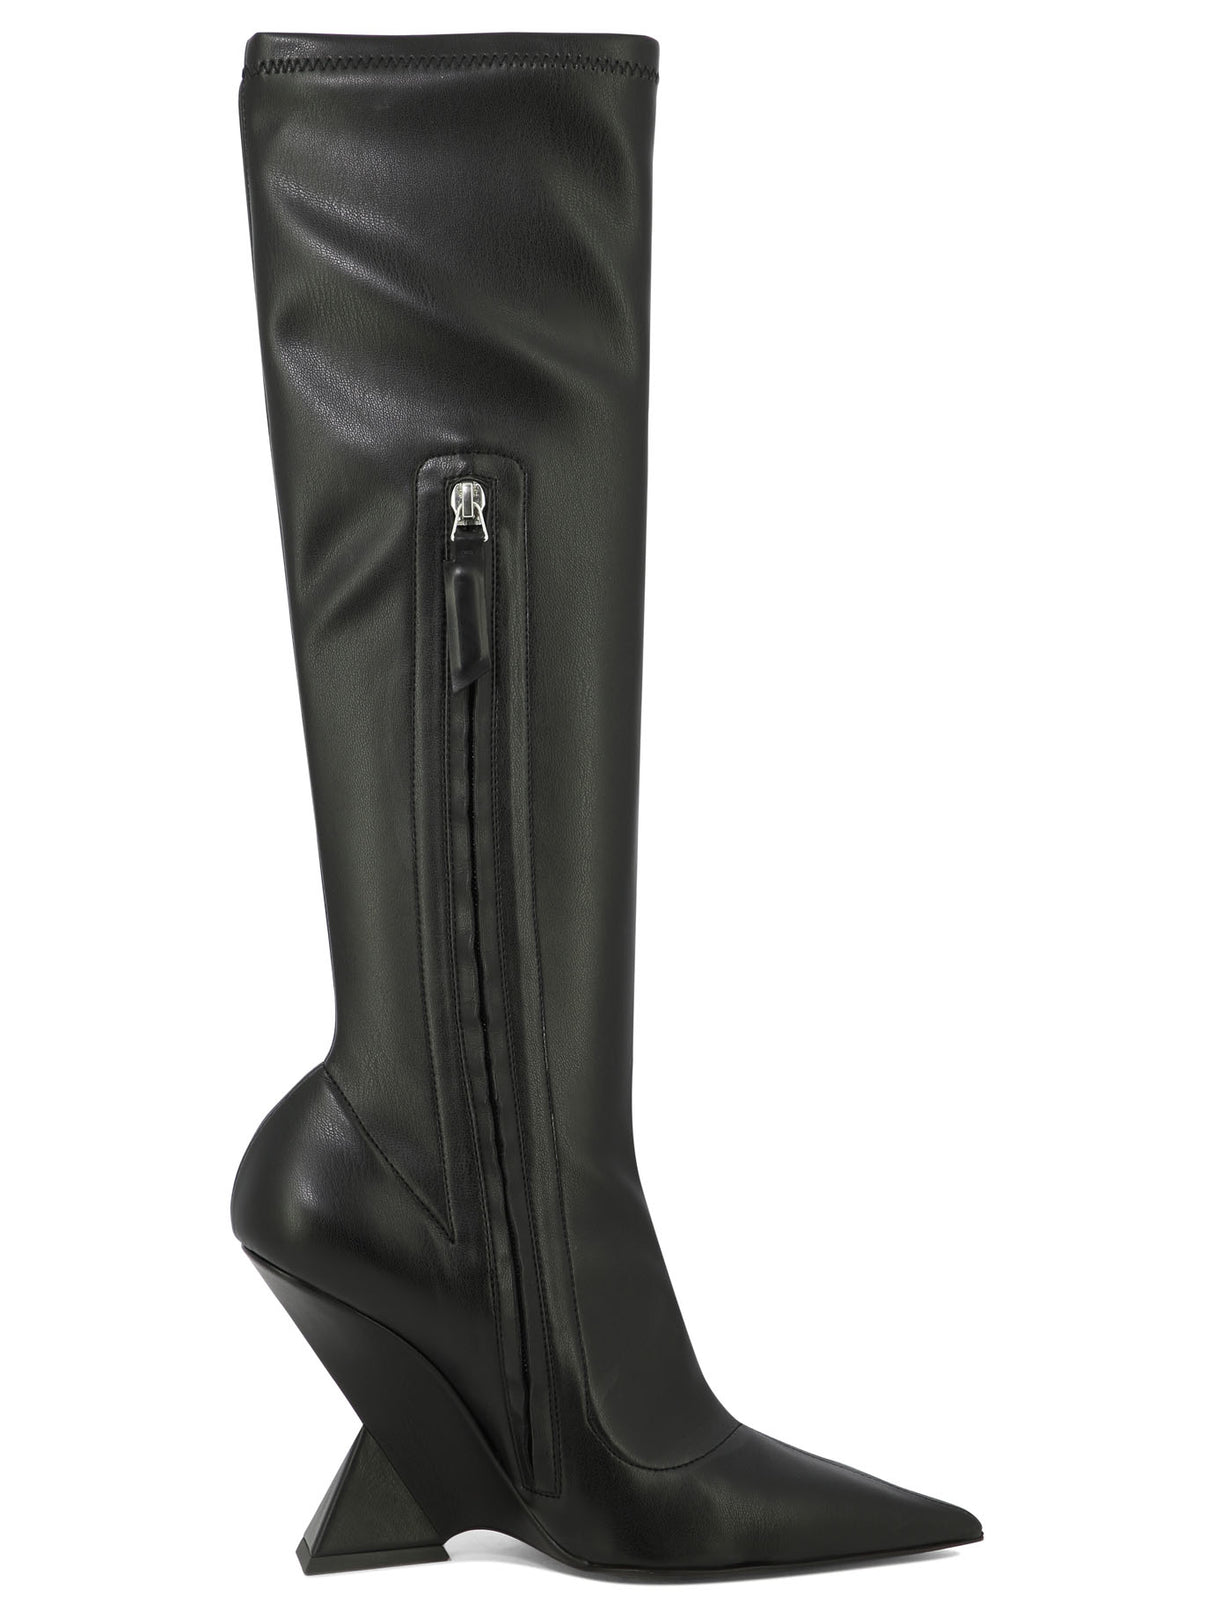 THE ATTICO Sleek and Sophisticated Black Leather Pull-On Boots